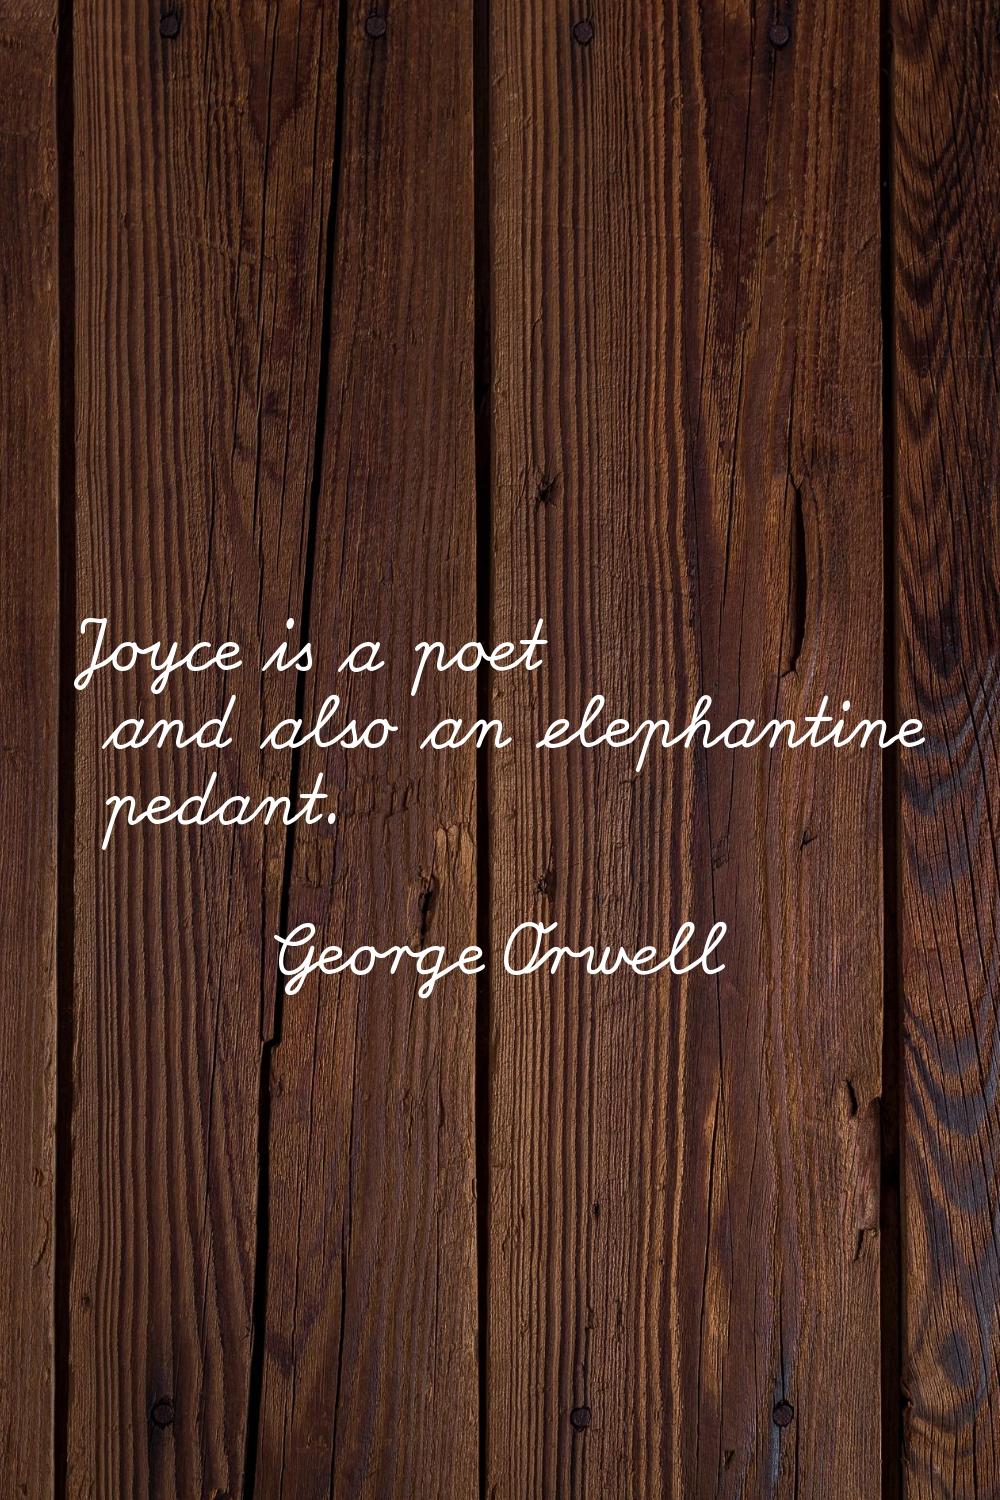 Joyce is a poet and also an elephantine pedant.